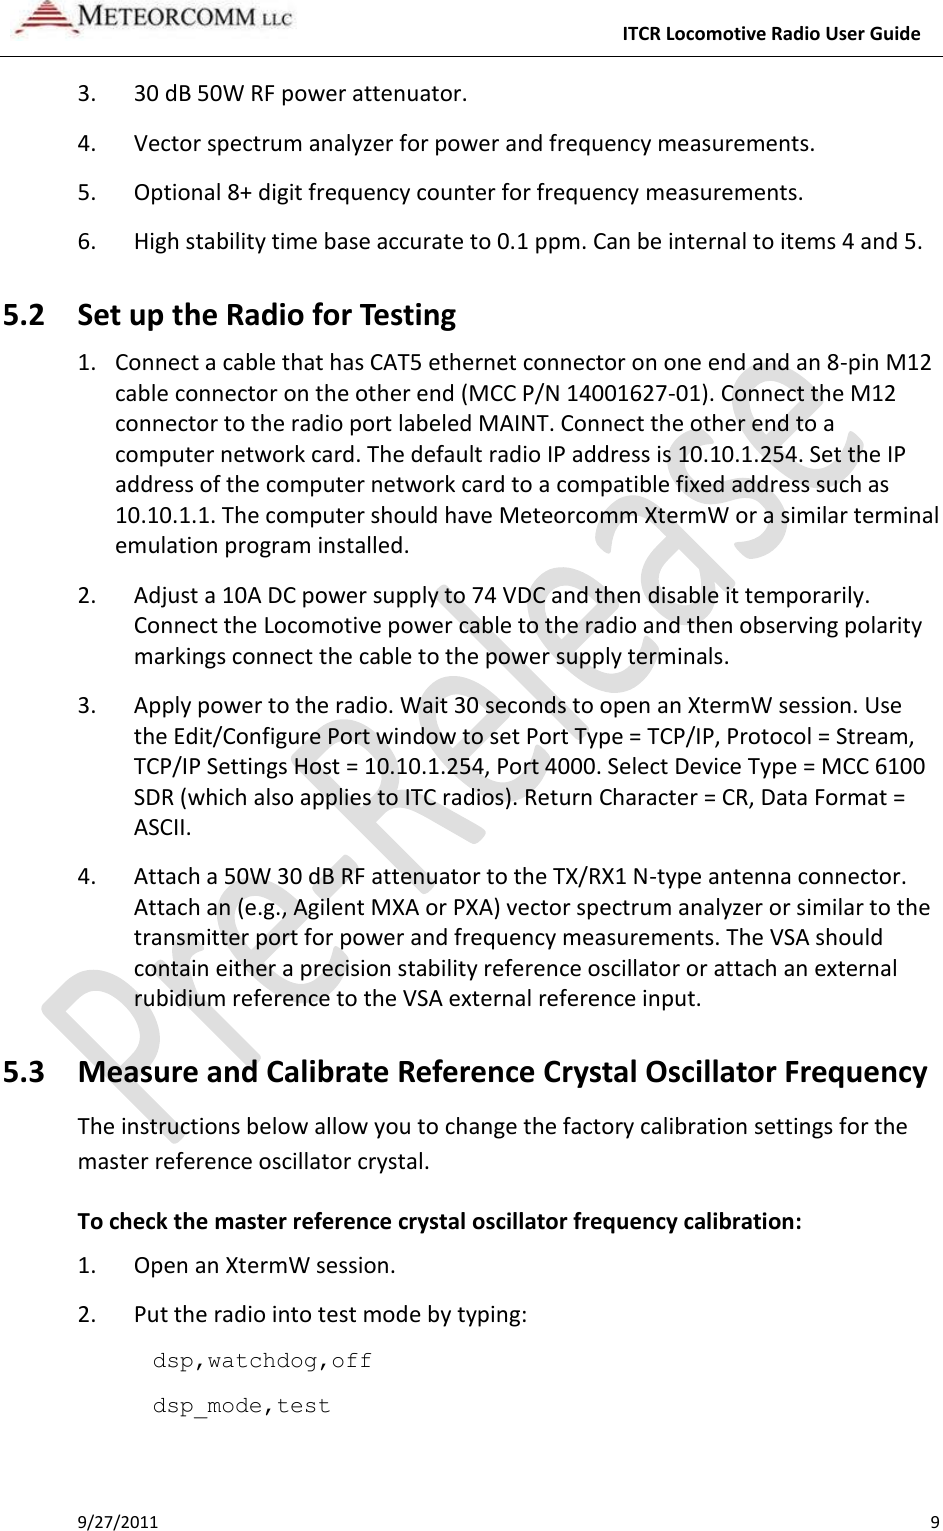     ITCR Locomotive Radio User Guide 9/27/2011    9 3. 30 dB 50W RF power attenuator. 4. Vector spectrum analyzer for power and frequency measurements. 5. Optional 8+ digit frequency counter for frequency measurements. 6. High stability time base accurate to 0.1 ppm. Can be internal to items 4 and 5. 5.2 Set up the Radio for Testing 1. Connect a cable that has CAT5 ethernet connector on one end and an 8-pin M12 cable connector on the other end (MCC P/N 14001627-01). Connect the M12 connector to the radio port labeled MAINT. Connect the other end to a computer network card. The default radio IP address is 10.10.1.254. Set the IP address of the computer network card to a compatible fixed address such as 10.10.1.1. The computer should have Meteorcomm XtermW or a similar terminal emulation program installed.    2. Adjust a 10A DC power supply to 74 VDC and then disable it temporarily. Connect the Locomotive power cable to the radio and then observing polarity markings connect the cable to the power supply terminals. 3. Apply power to the radio. Wait 30 seconds to open an XtermW session. Use the Edit/Configure Port window to set Port Type = TCP/IP, Protocol = Stream, TCP/IP Settings Host = 10.10.1.254, Port 4000. Select Device Type = MCC 6100 SDR (which also applies to ITC radios). Return Character = CR, Data Format = ASCII. 4. Attach a 50W 30 dB RF attenuator to the TX/RX1 N-type antenna connector. Attach an (e.g., Agilent MXA or PXA) vector spectrum analyzer or similar to the transmitter port for power and frequency measurements. The VSA should contain either a precision stability reference oscillator or attach an external rubidium reference to the VSA external reference input. 5.3 Measure and Calibrate Reference Crystal Oscillator Frequency The instructions below allow you to change the factory calibration settings for the master reference oscillator crystal.  To check the master reference crystal oscillator frequency calibration: 1.  Open an XtermW session. 2.  Put the radio into test mode by typing: dsp,watchdog,off dsp_mode,test 